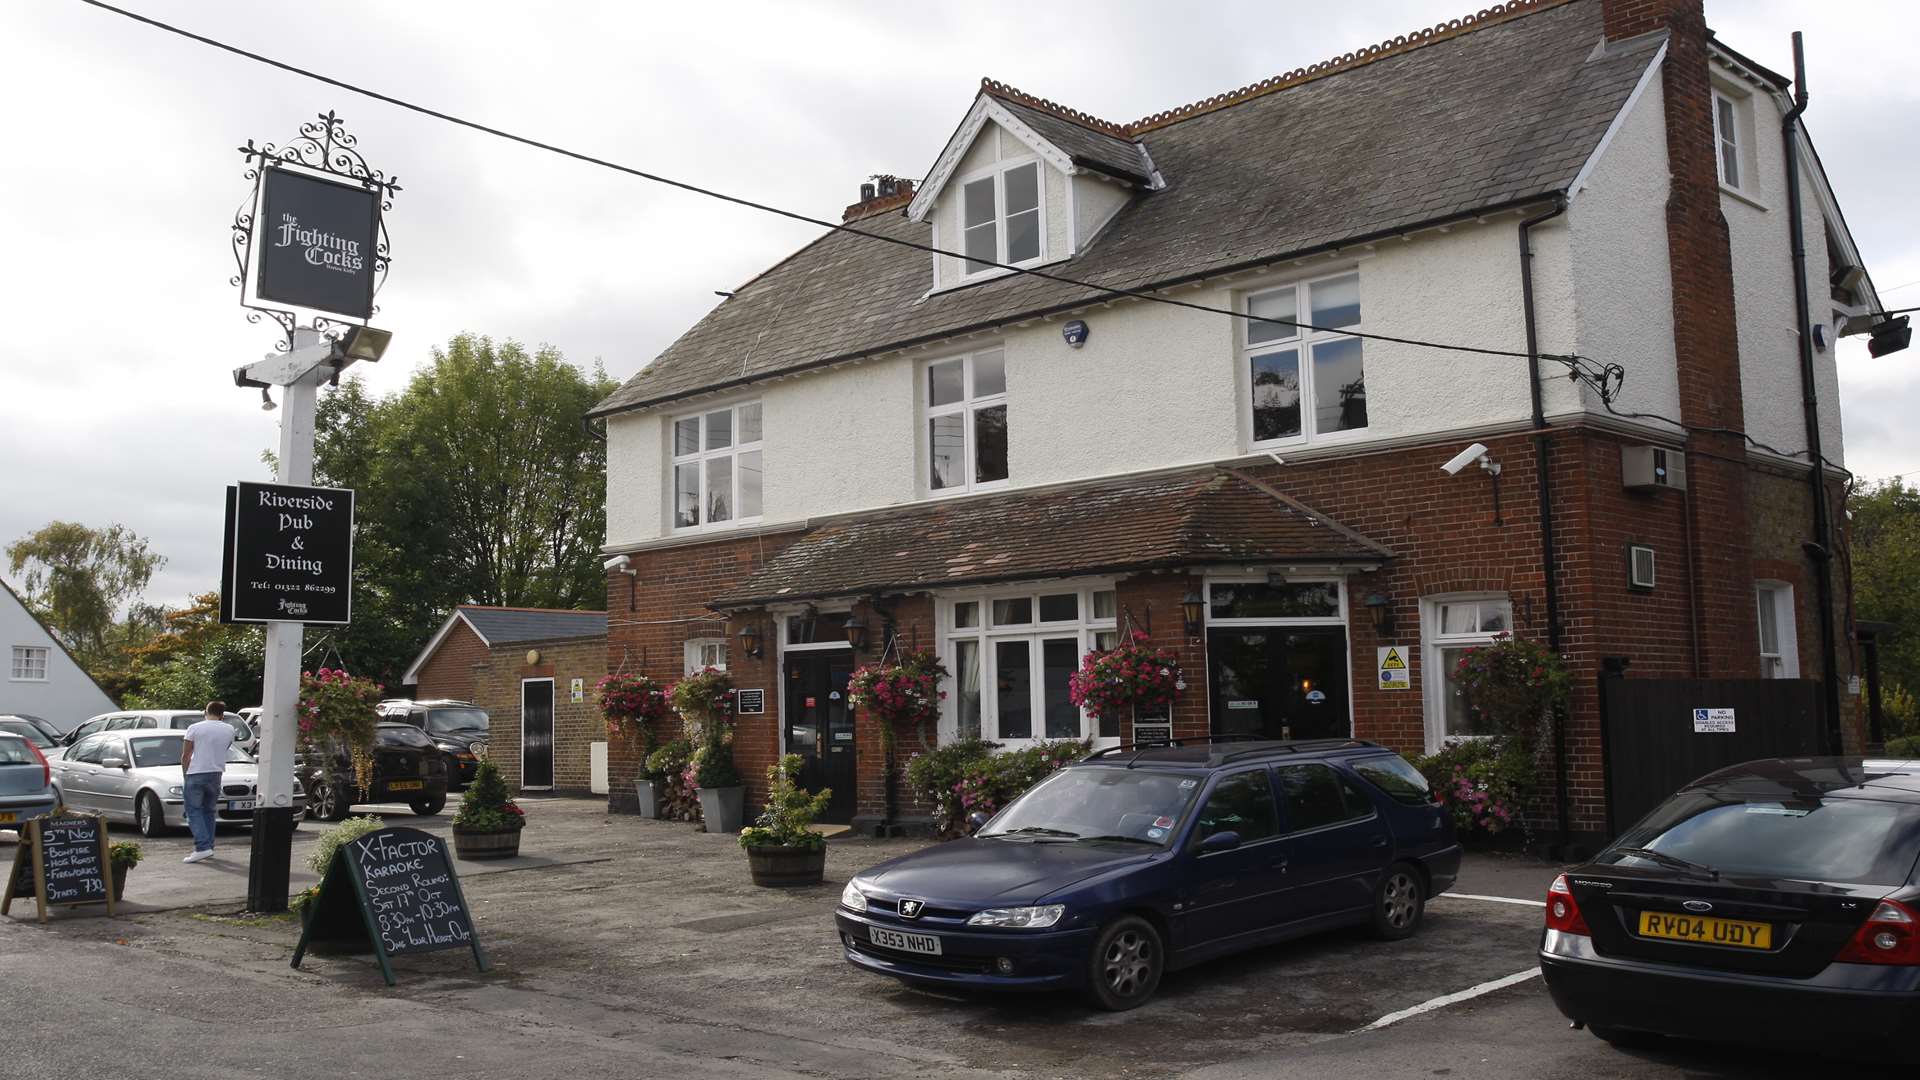 The Fighting Cocks in Horton Kirby